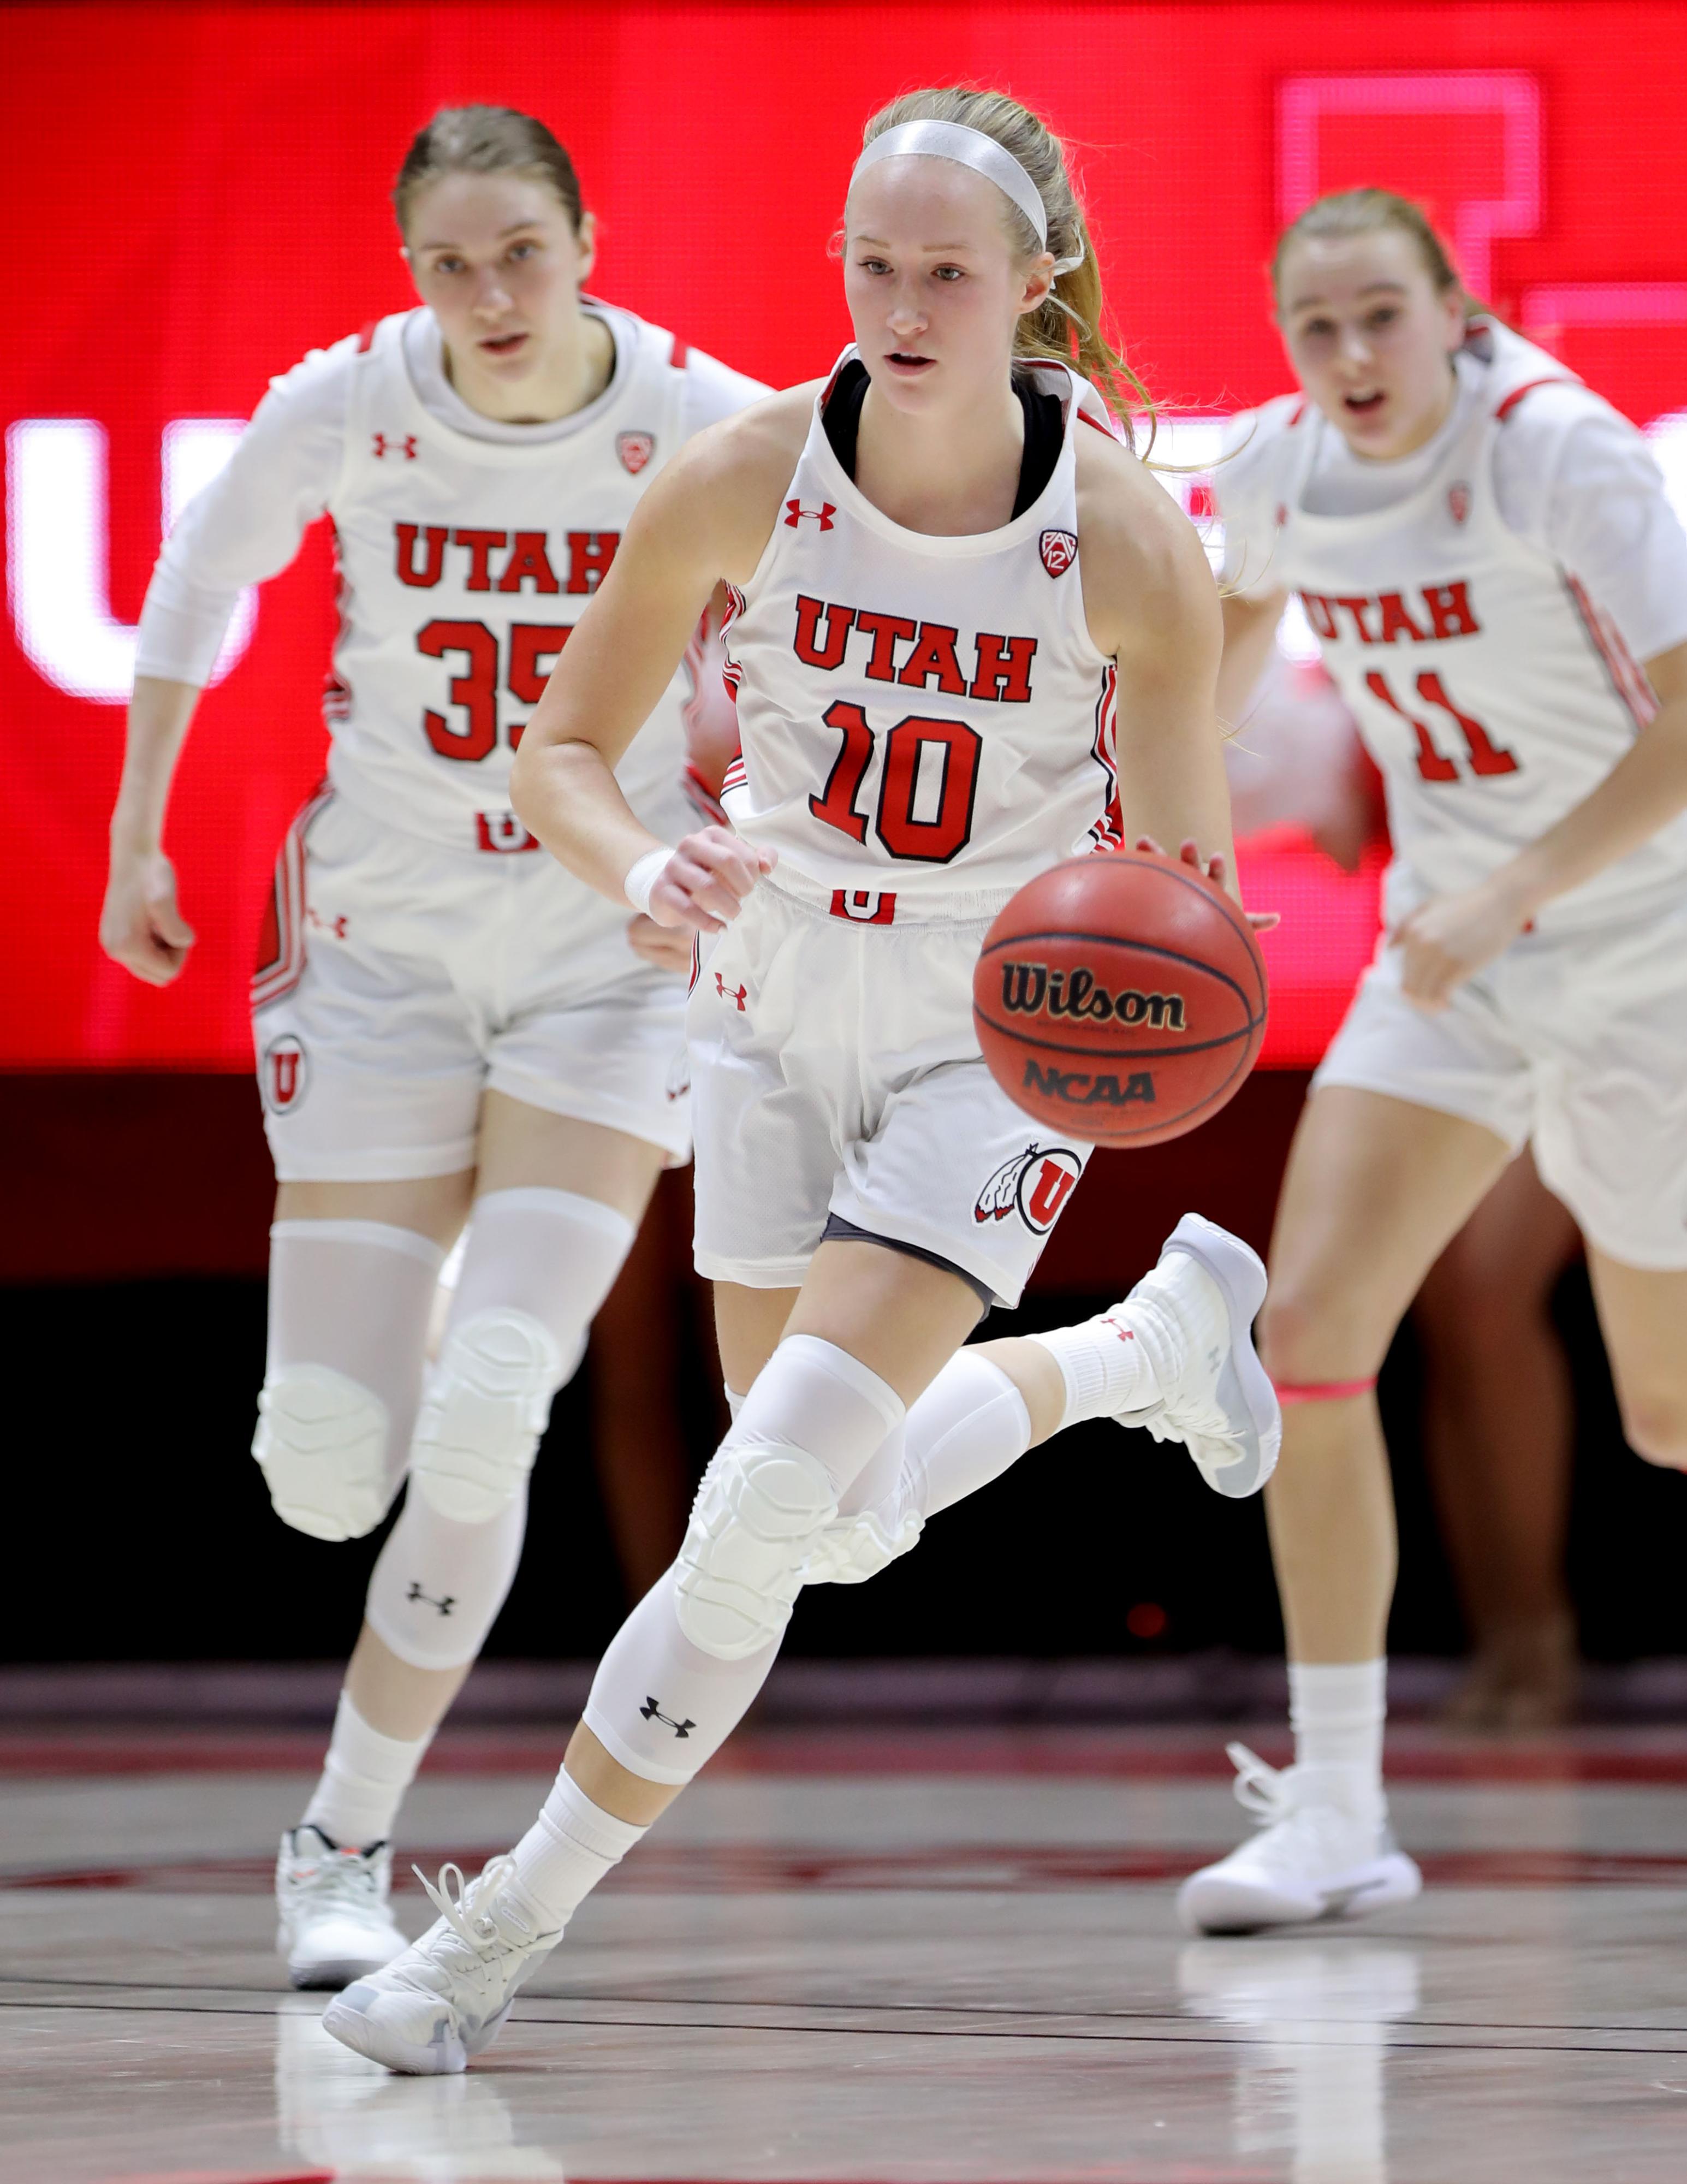 Picture of University of Utah Women's Basketball player, Dru Gylten, dribbling basketball on the court during a game